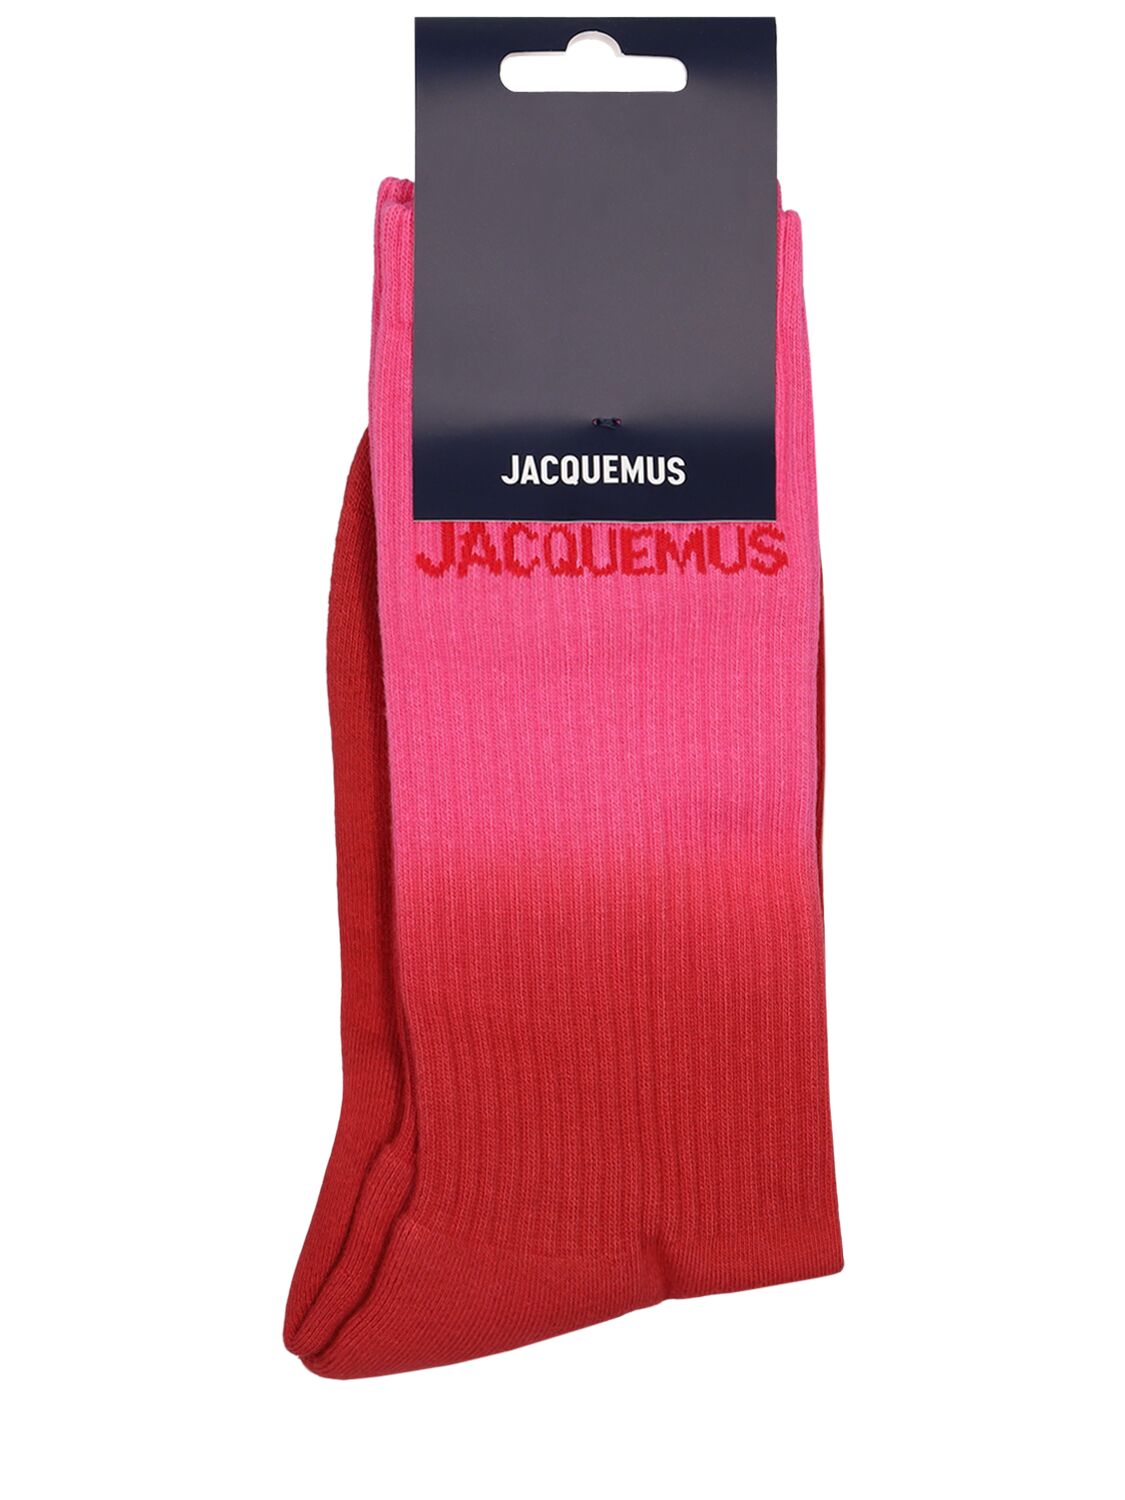 Jacquemus Les Chaussettes Moisson Socks In Multi-red